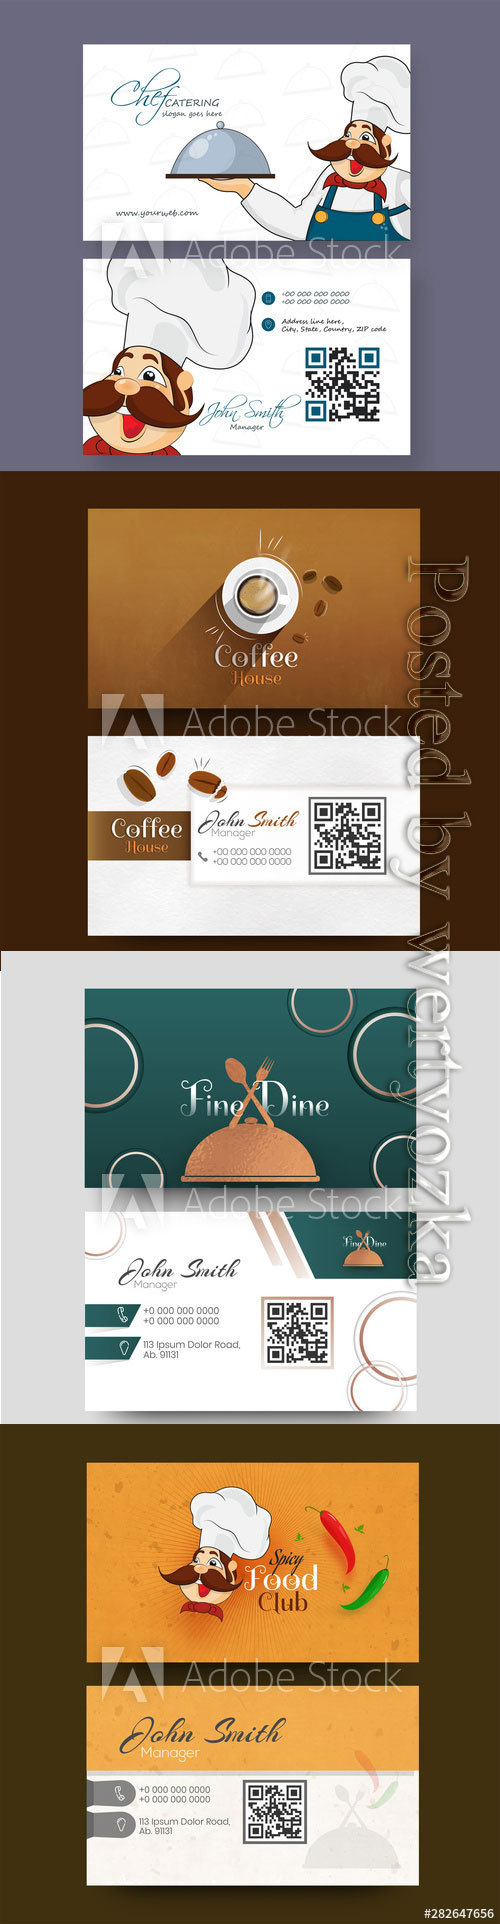 Food Club business card or visiting card design